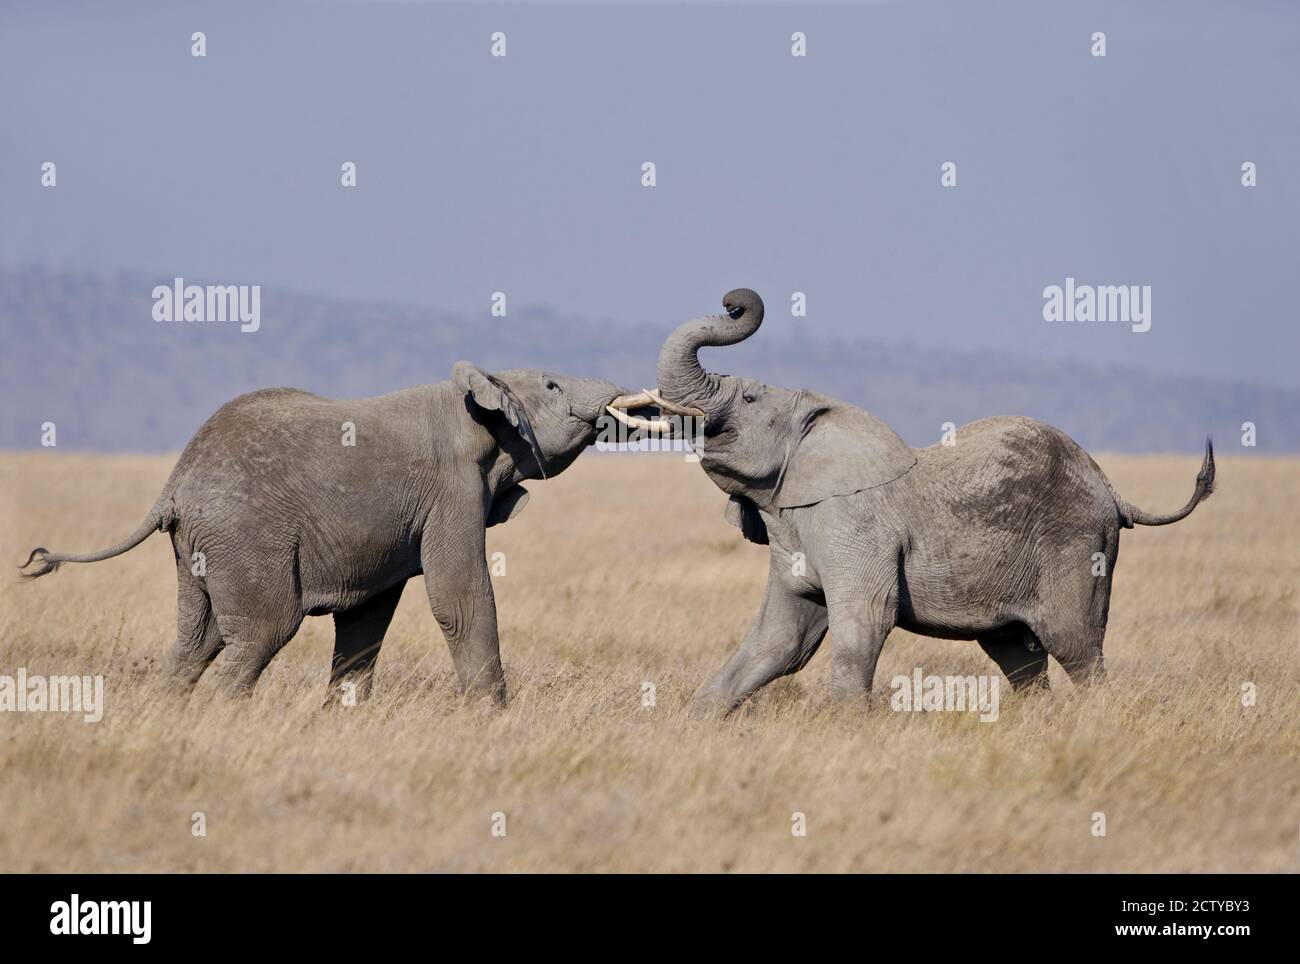 Two African elephants (Loxodonta africana) fighting in a field, Tanzania Stock Photo